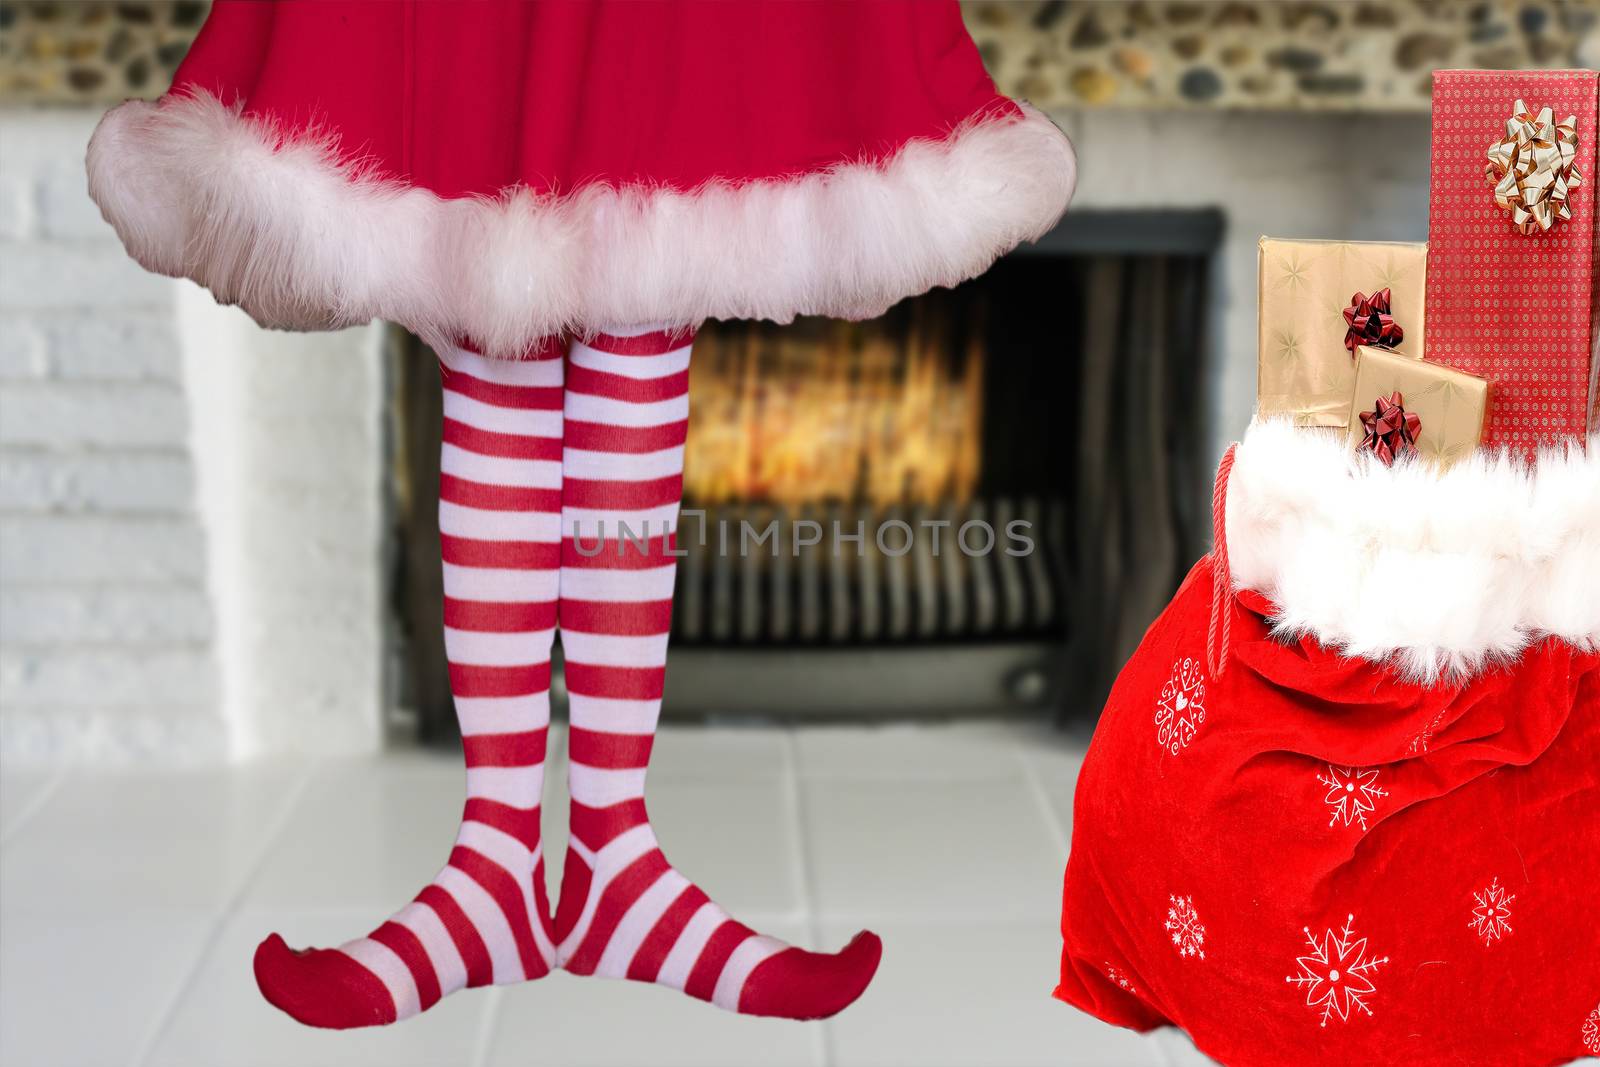 adorable cute little christmas elf girl with pointy feet wearing striped elf stockings and a red dress standing next to a santa claus bag full of presents in front of a burning fireplace by charlottebleijenberg